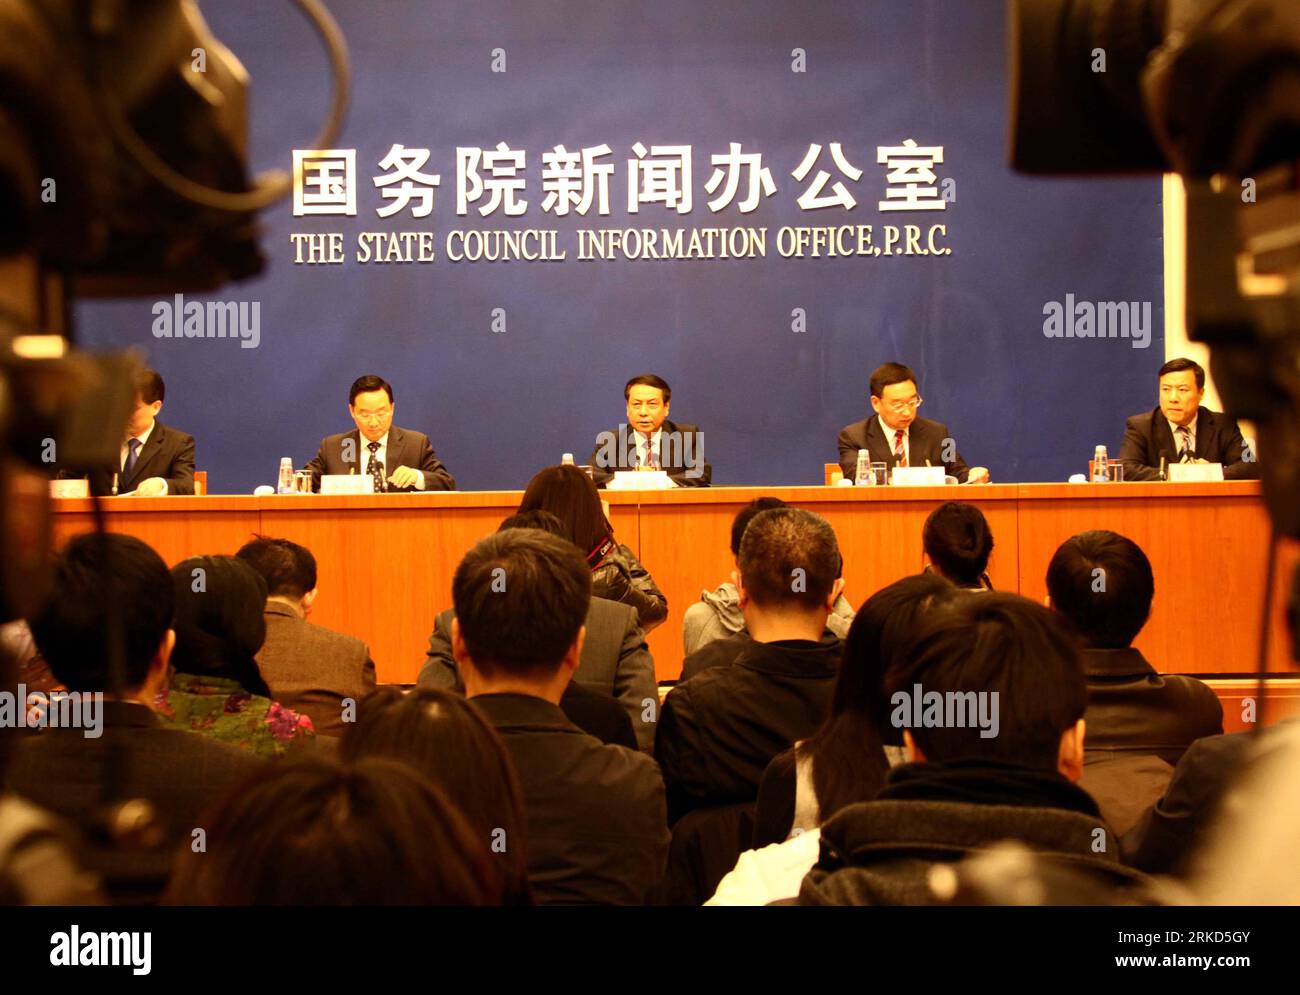 Bildnummer: 54864833  Datum: 30.01.2011  Copyright: imago/Xinhua (110130) -- BEIJING, Jan. 30, 2011 (Xinhua) -- Photo taken on Jan. 30, 2011 shows the press conference held by State Council Information Office in Beijing, capital of China. China would carry out strict water resource management measures to grapple with water shortages, Minister of Water Resources Chen Lei said Sunday after the central authorities Saturday issued its first document of the year. (Xinhua/Gao Xueyu) (cxy) CHINA-BEIJING-WATER PROTECTION-PRESS CONFERENCE (CN) PUBLICATIONxNOTxINxCHN People Politik kbdig xdp 2011 quer o Stock Photo